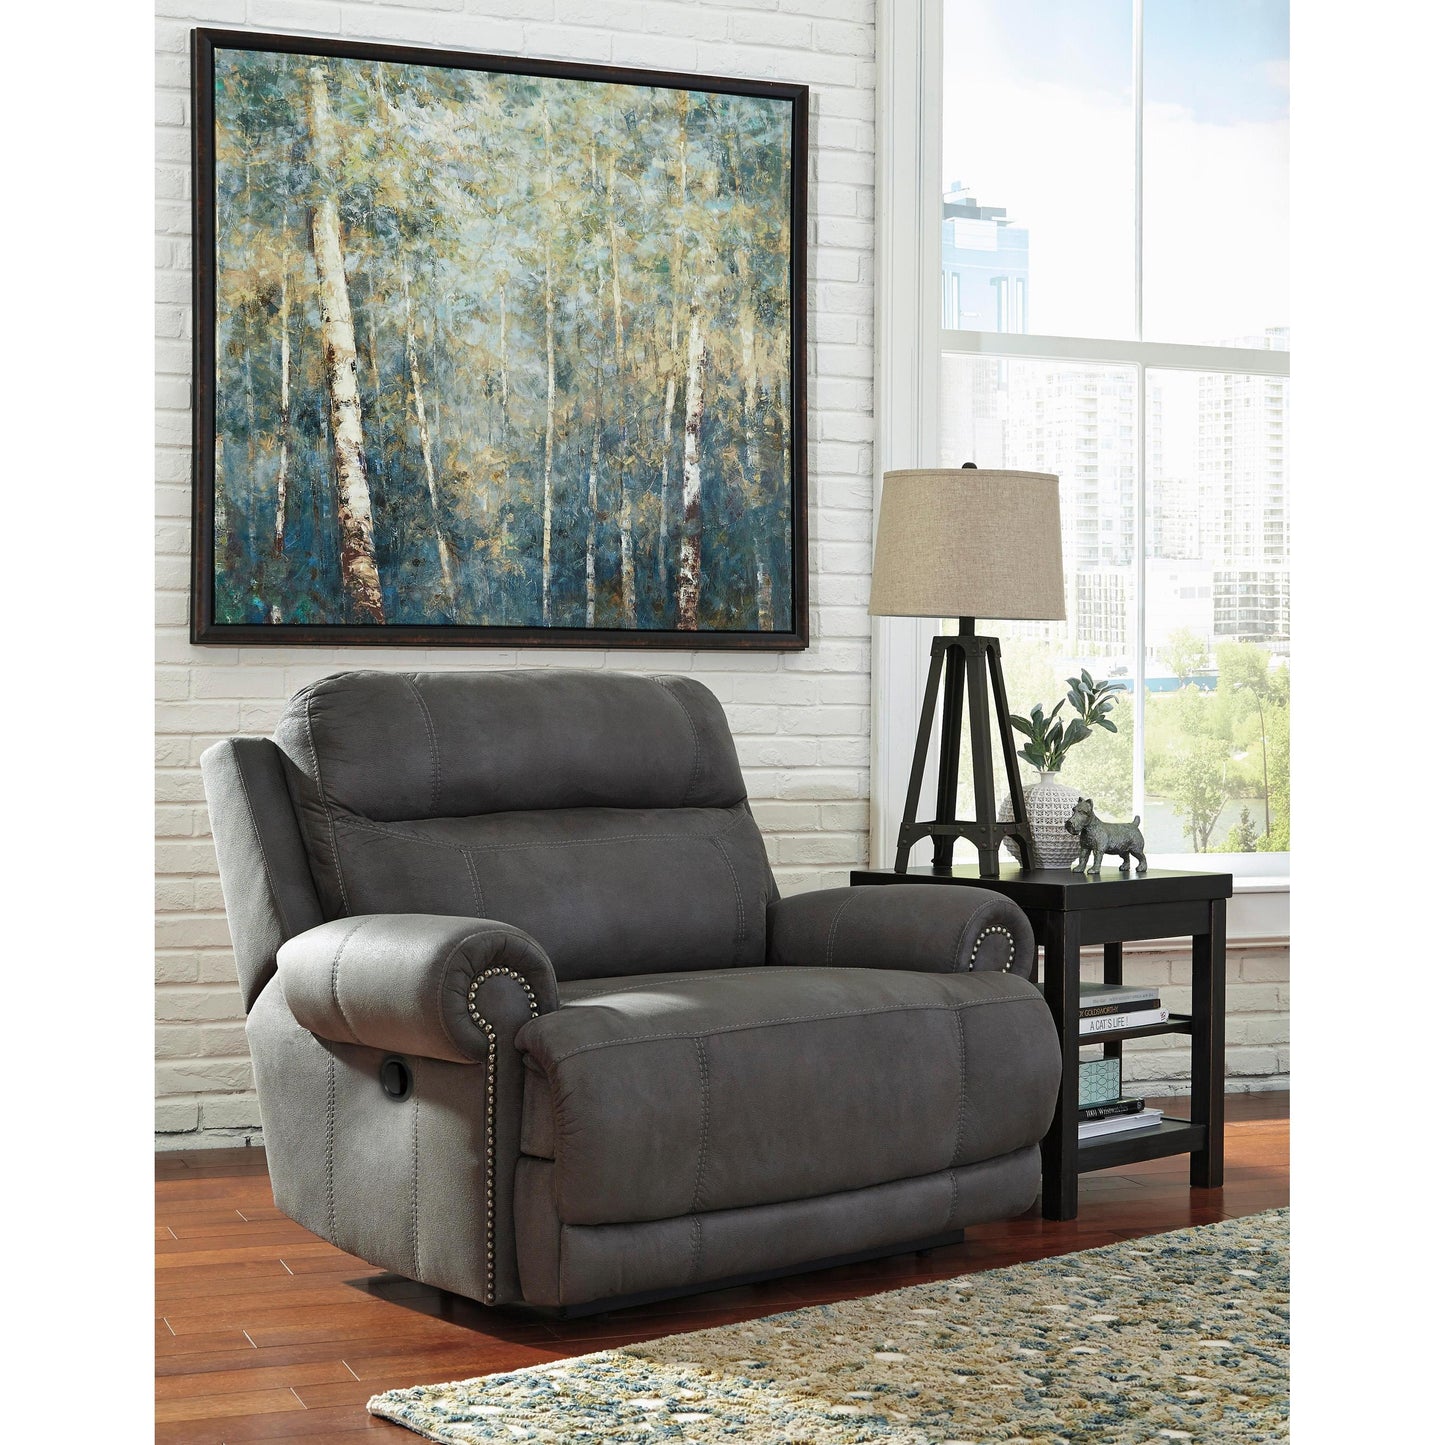 Signature Design by Ashley Austere 38401 3 pc Reclining Living Room Set IMAGE 2